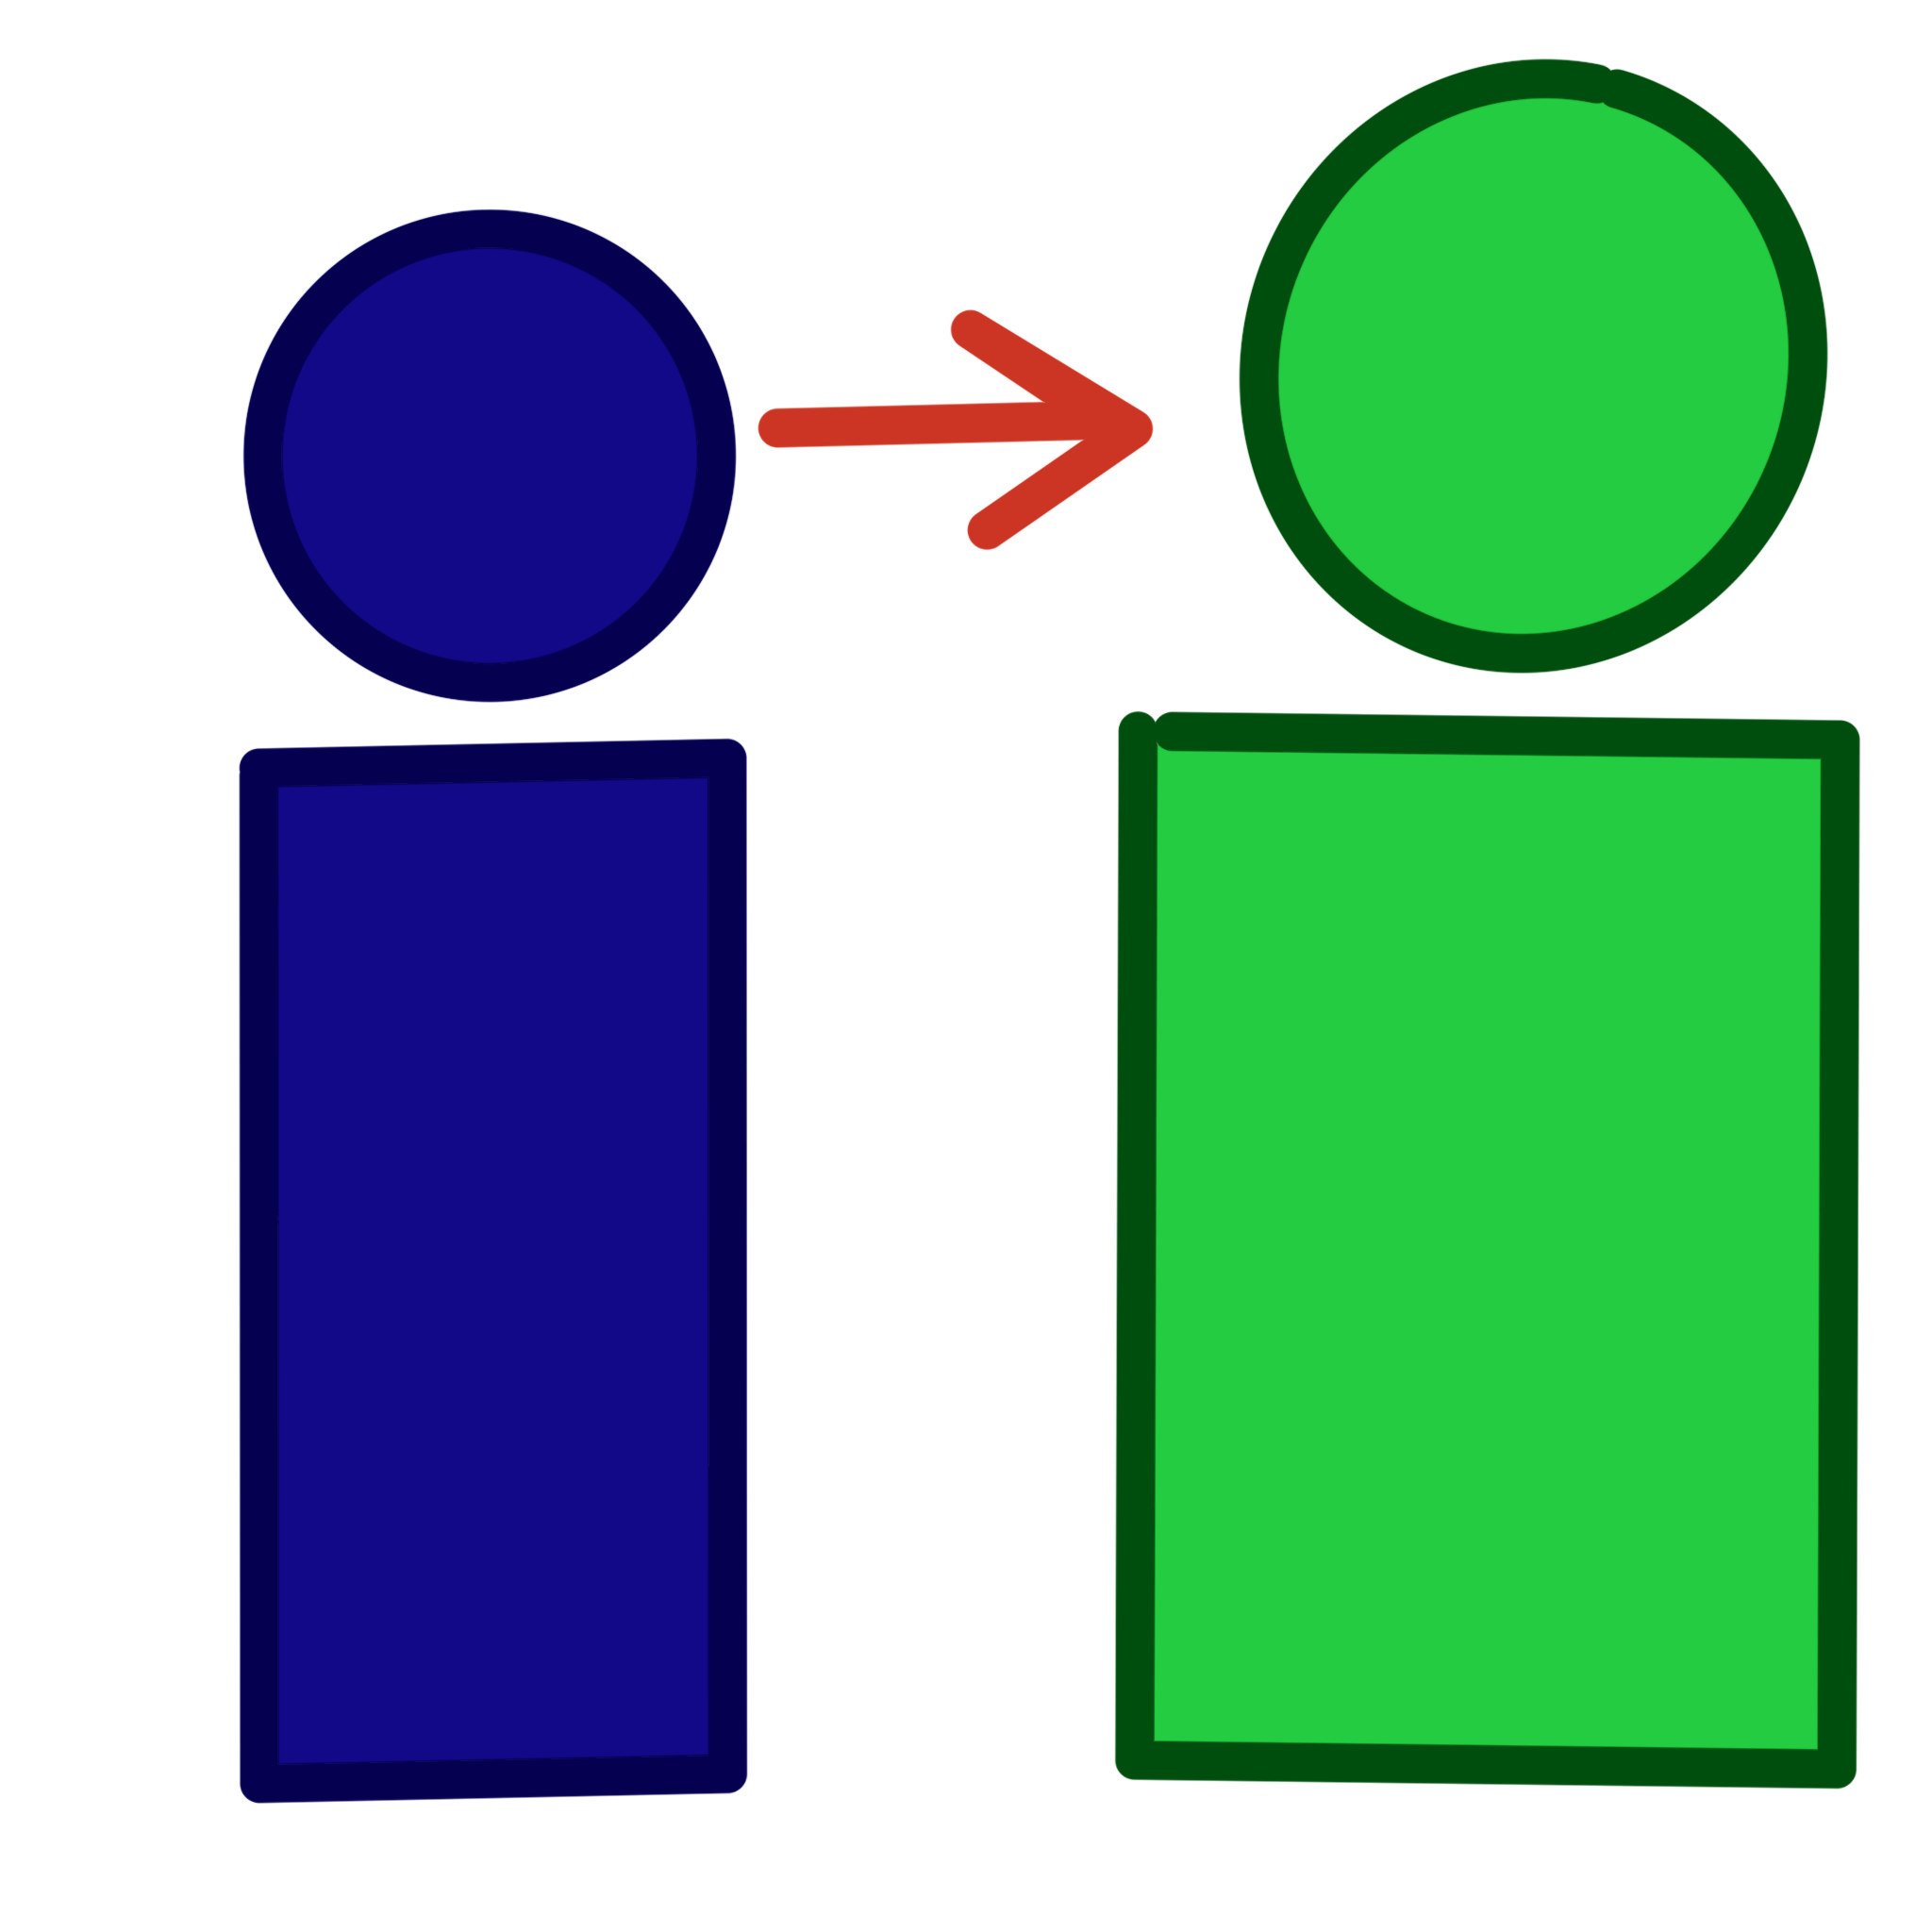  A very simple drawing of two people In between the people at eye level is a red arrow. The person on the left is blue and on the right is green.